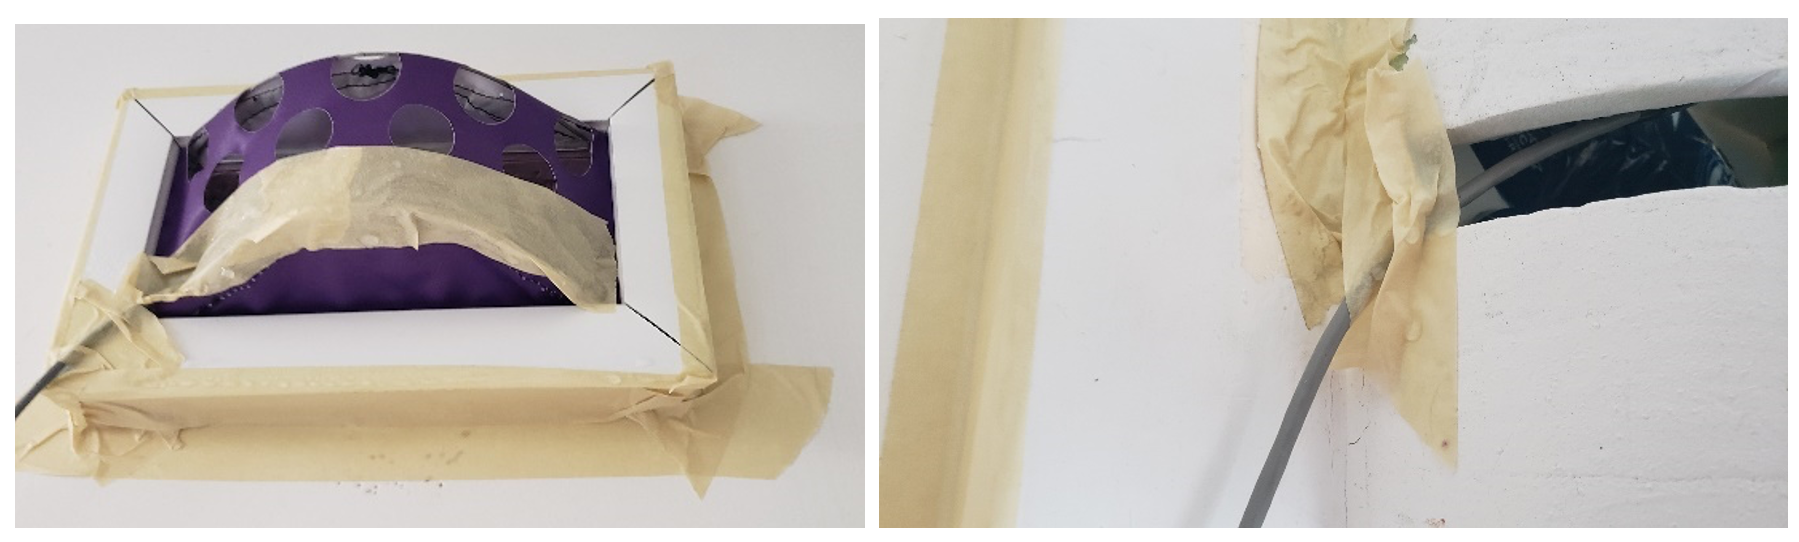 Figure 5: Images showing condensation on room side surfaces of tape and cable in line of airflow.